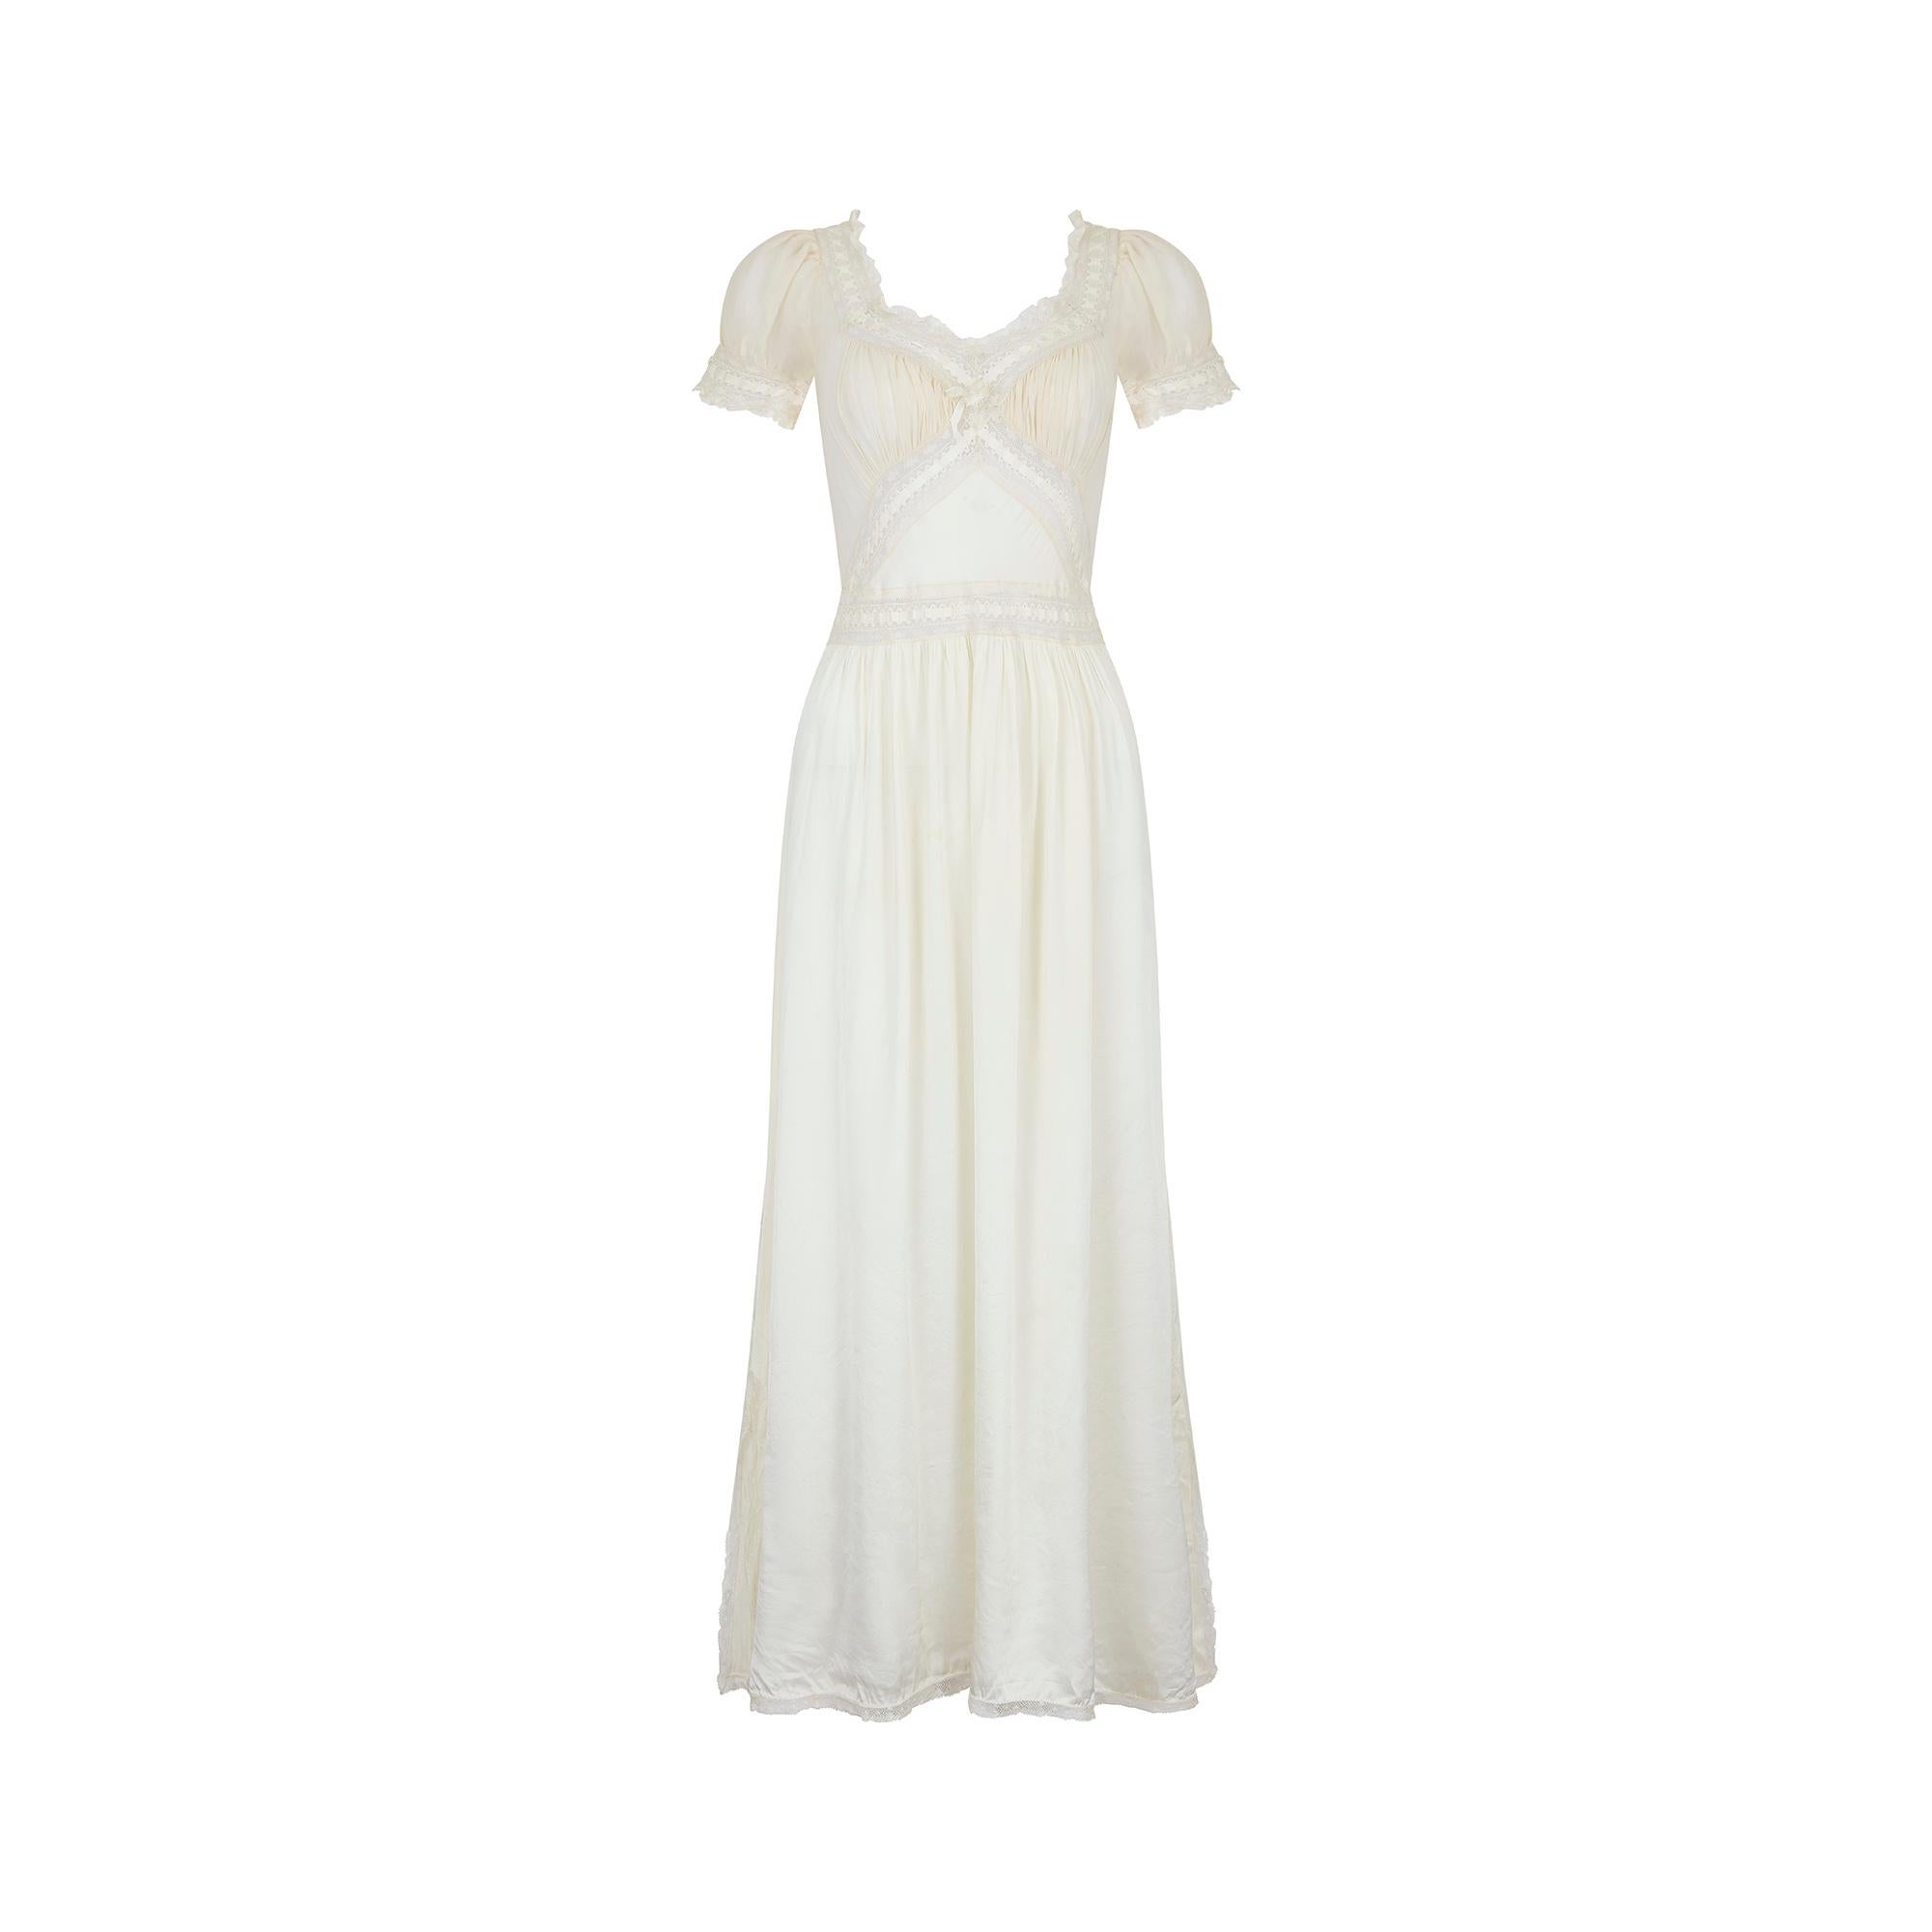 An incredible example of trousseau lingerie from the late 1930s or early 1940s.  This charmeuse rayon dress in a delicate shade of pale cream with white ribbon detail; it is ever so slightly sheer. It features a gathered bust section, sewn in an